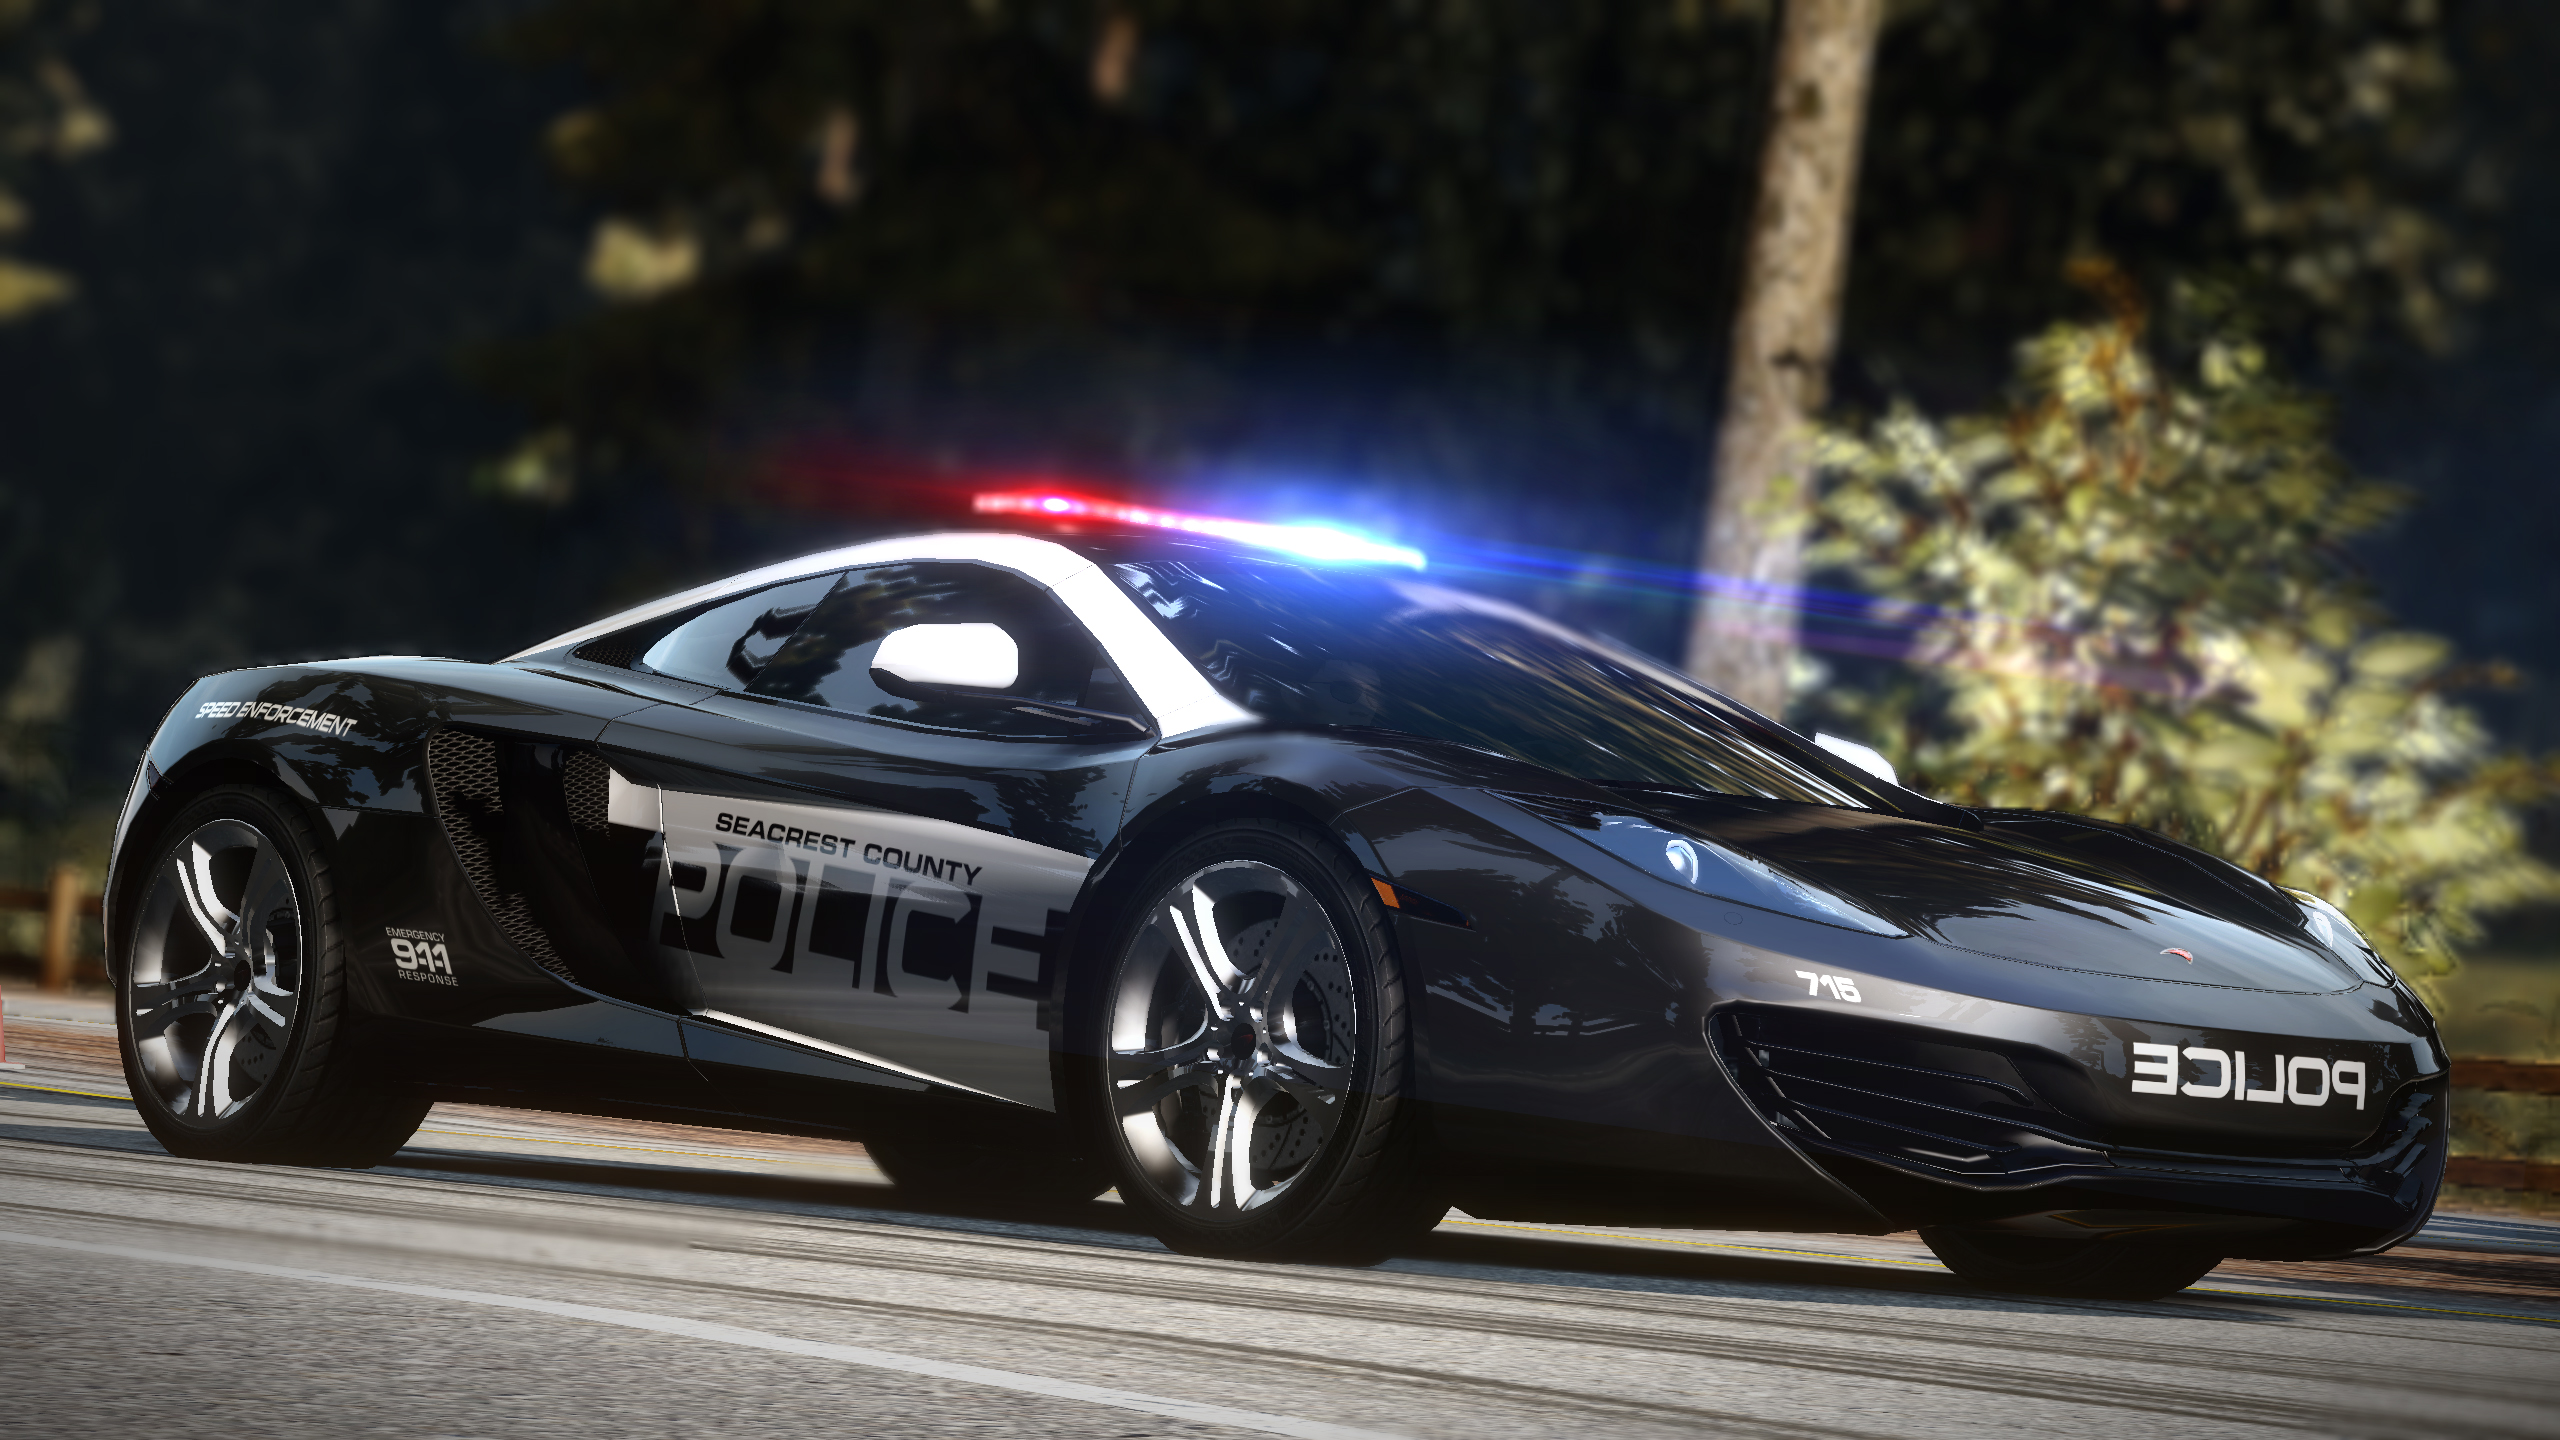 Video Game Need For Speed Hot Pursuit 2560x1440